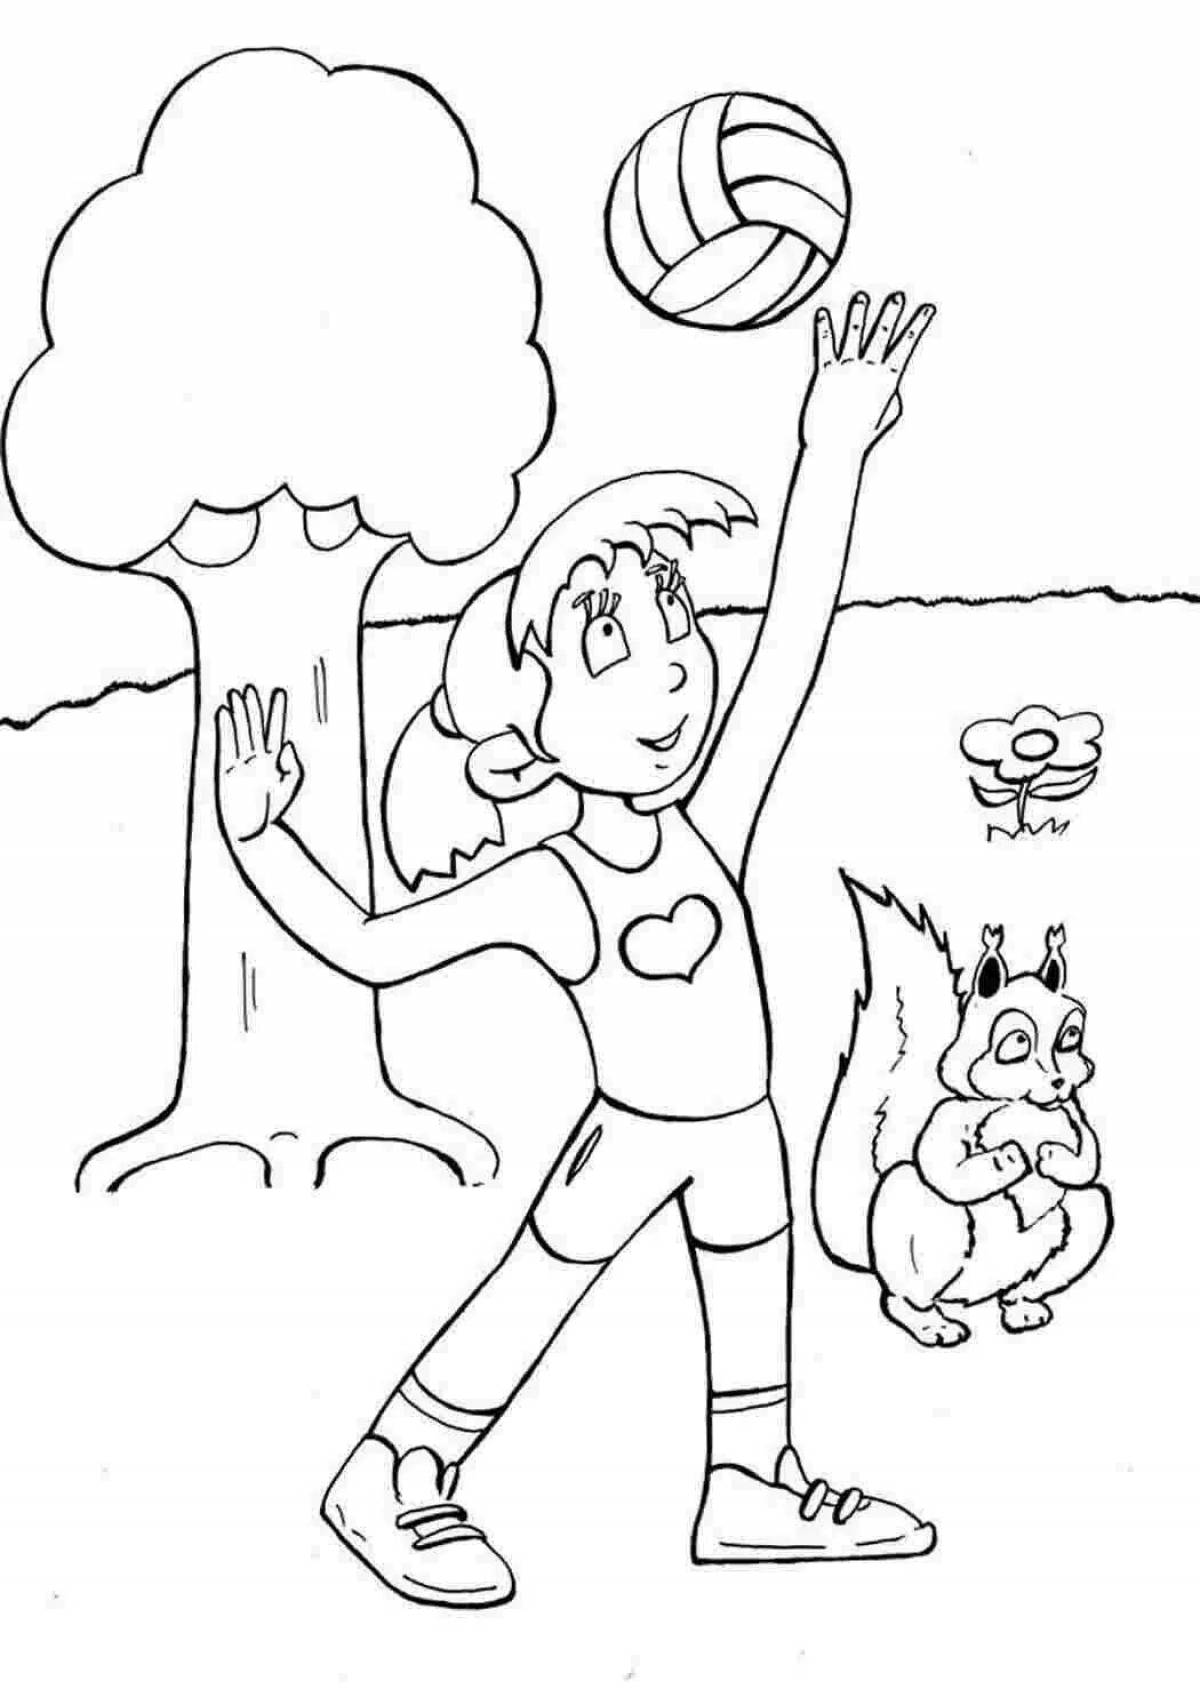 Entertaining coloring book health for children